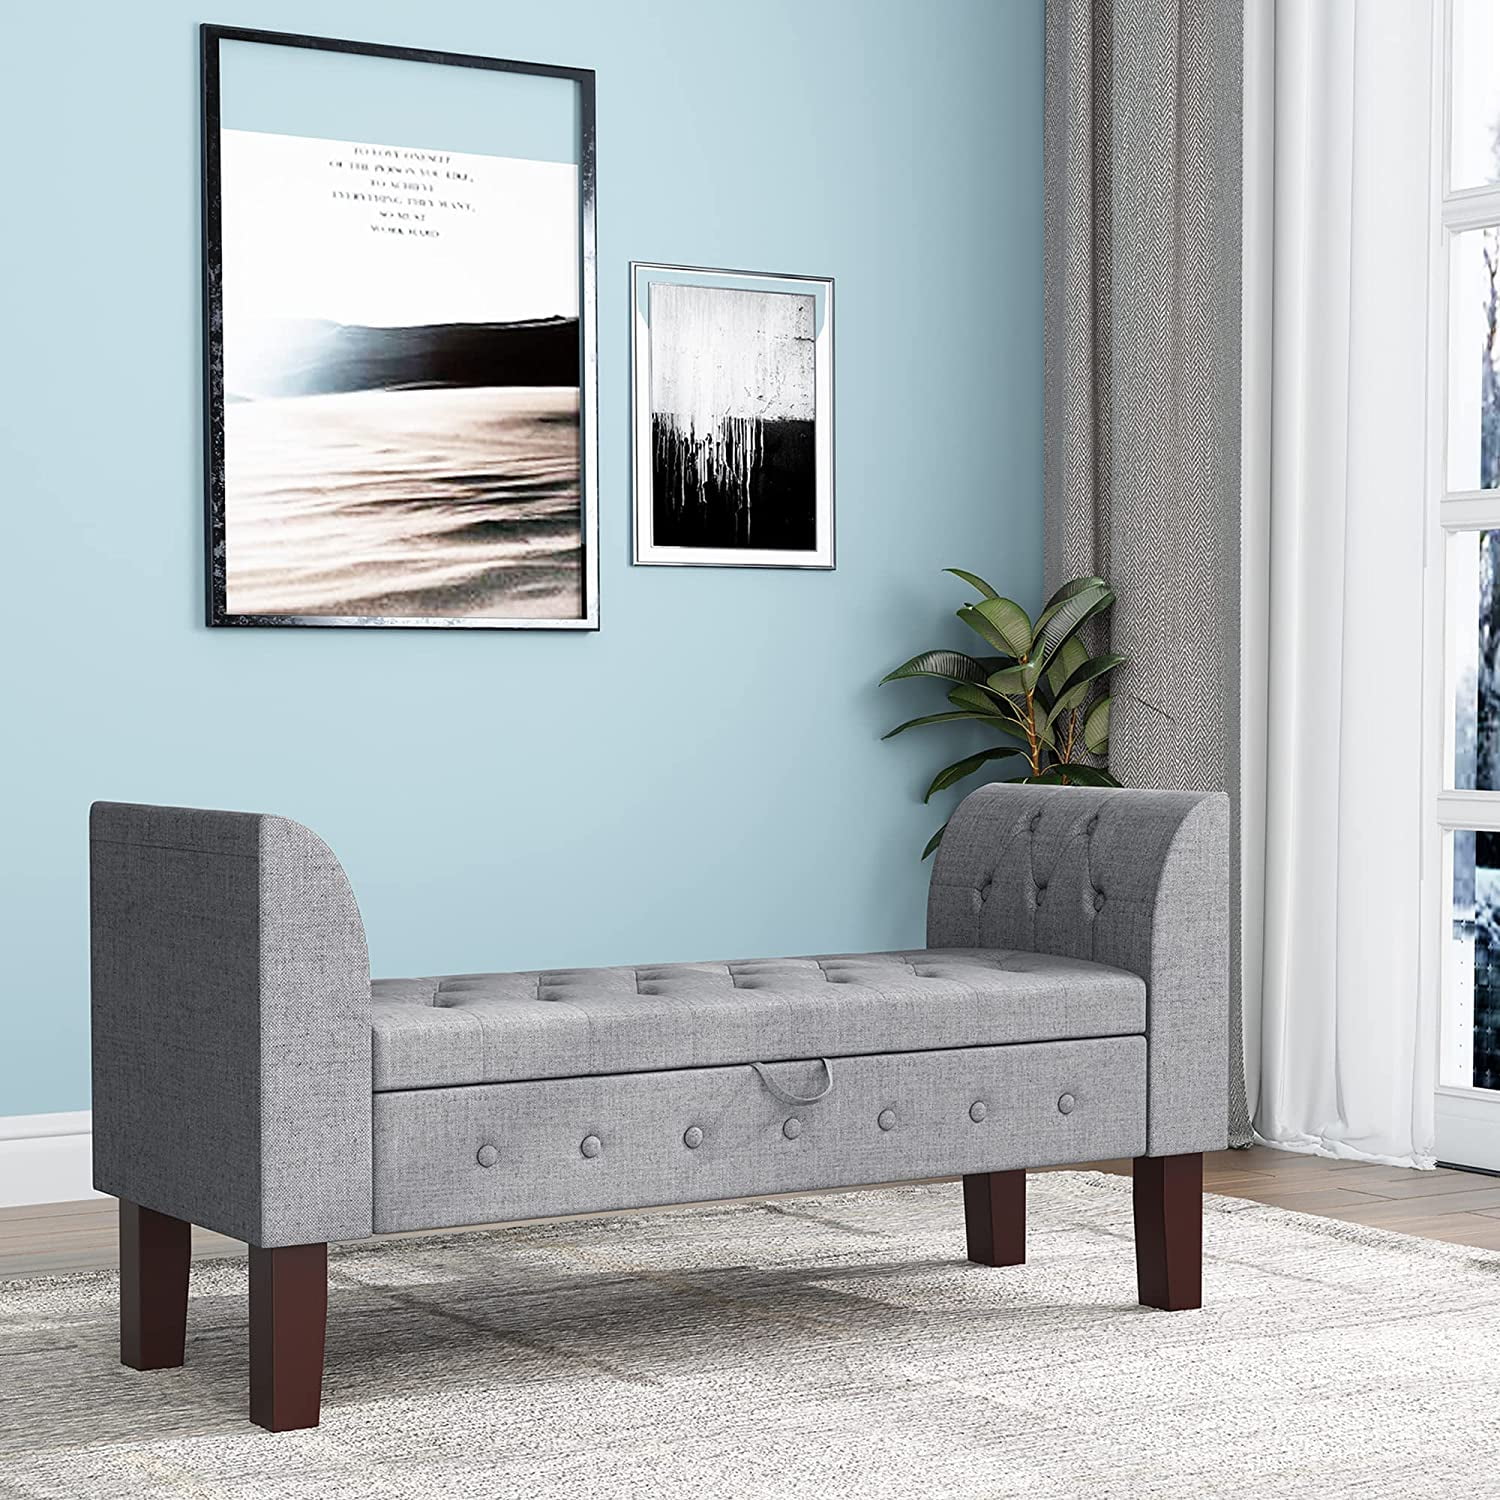 Andeworld Upholstered Storage Bench with Entryway Living Room Bench for Bedroom Ottoman Khaki Arms